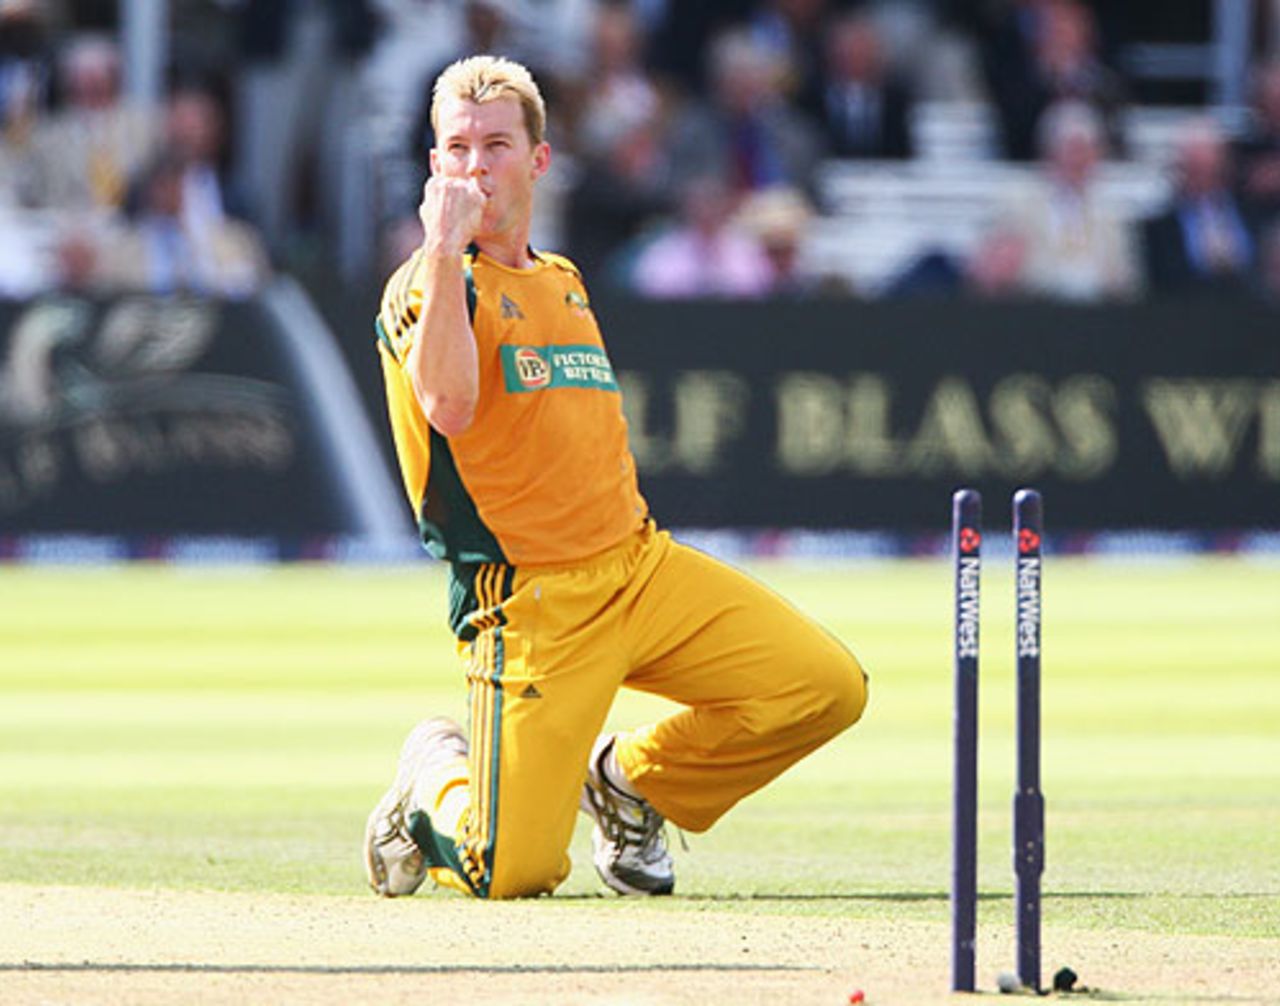 Brett Lee's yorkers proved unplayable as he claimed five wickets, England v Australia, 4th ODI, Lord's, September 12, 2009